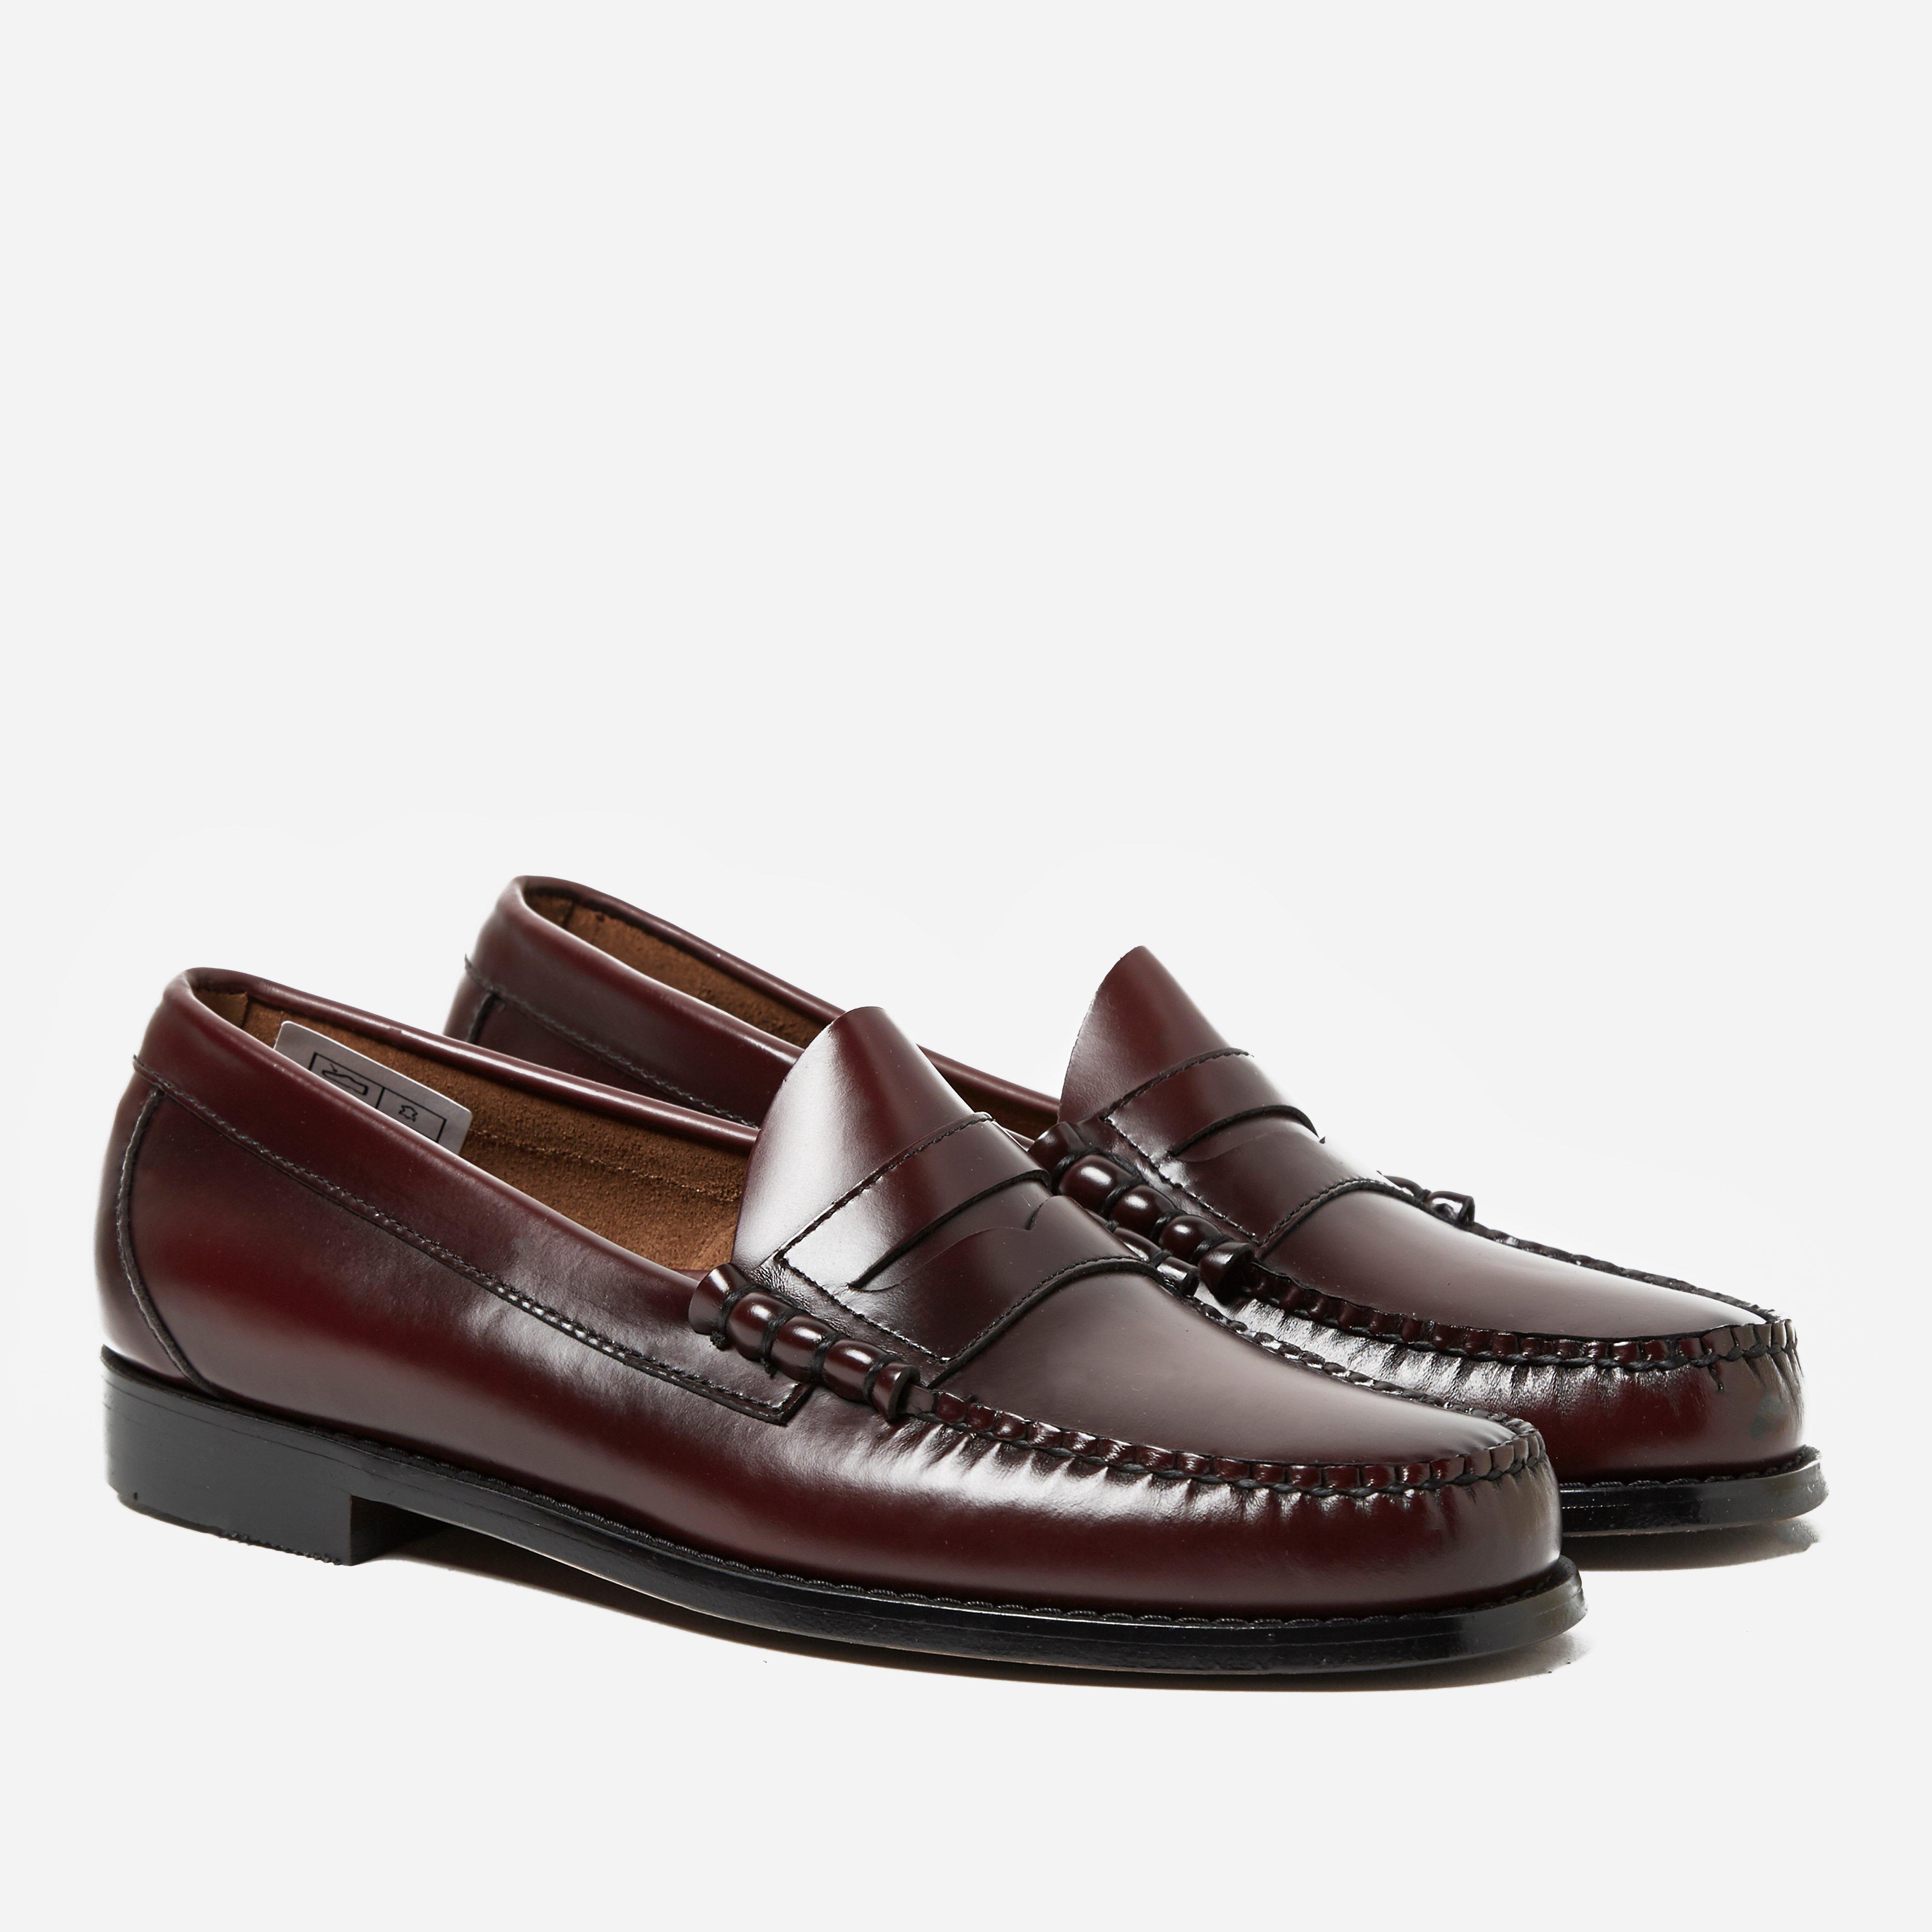 Lyst - G.H.BASS Bass Weejun Larson Penny Loafer in Brown for Men